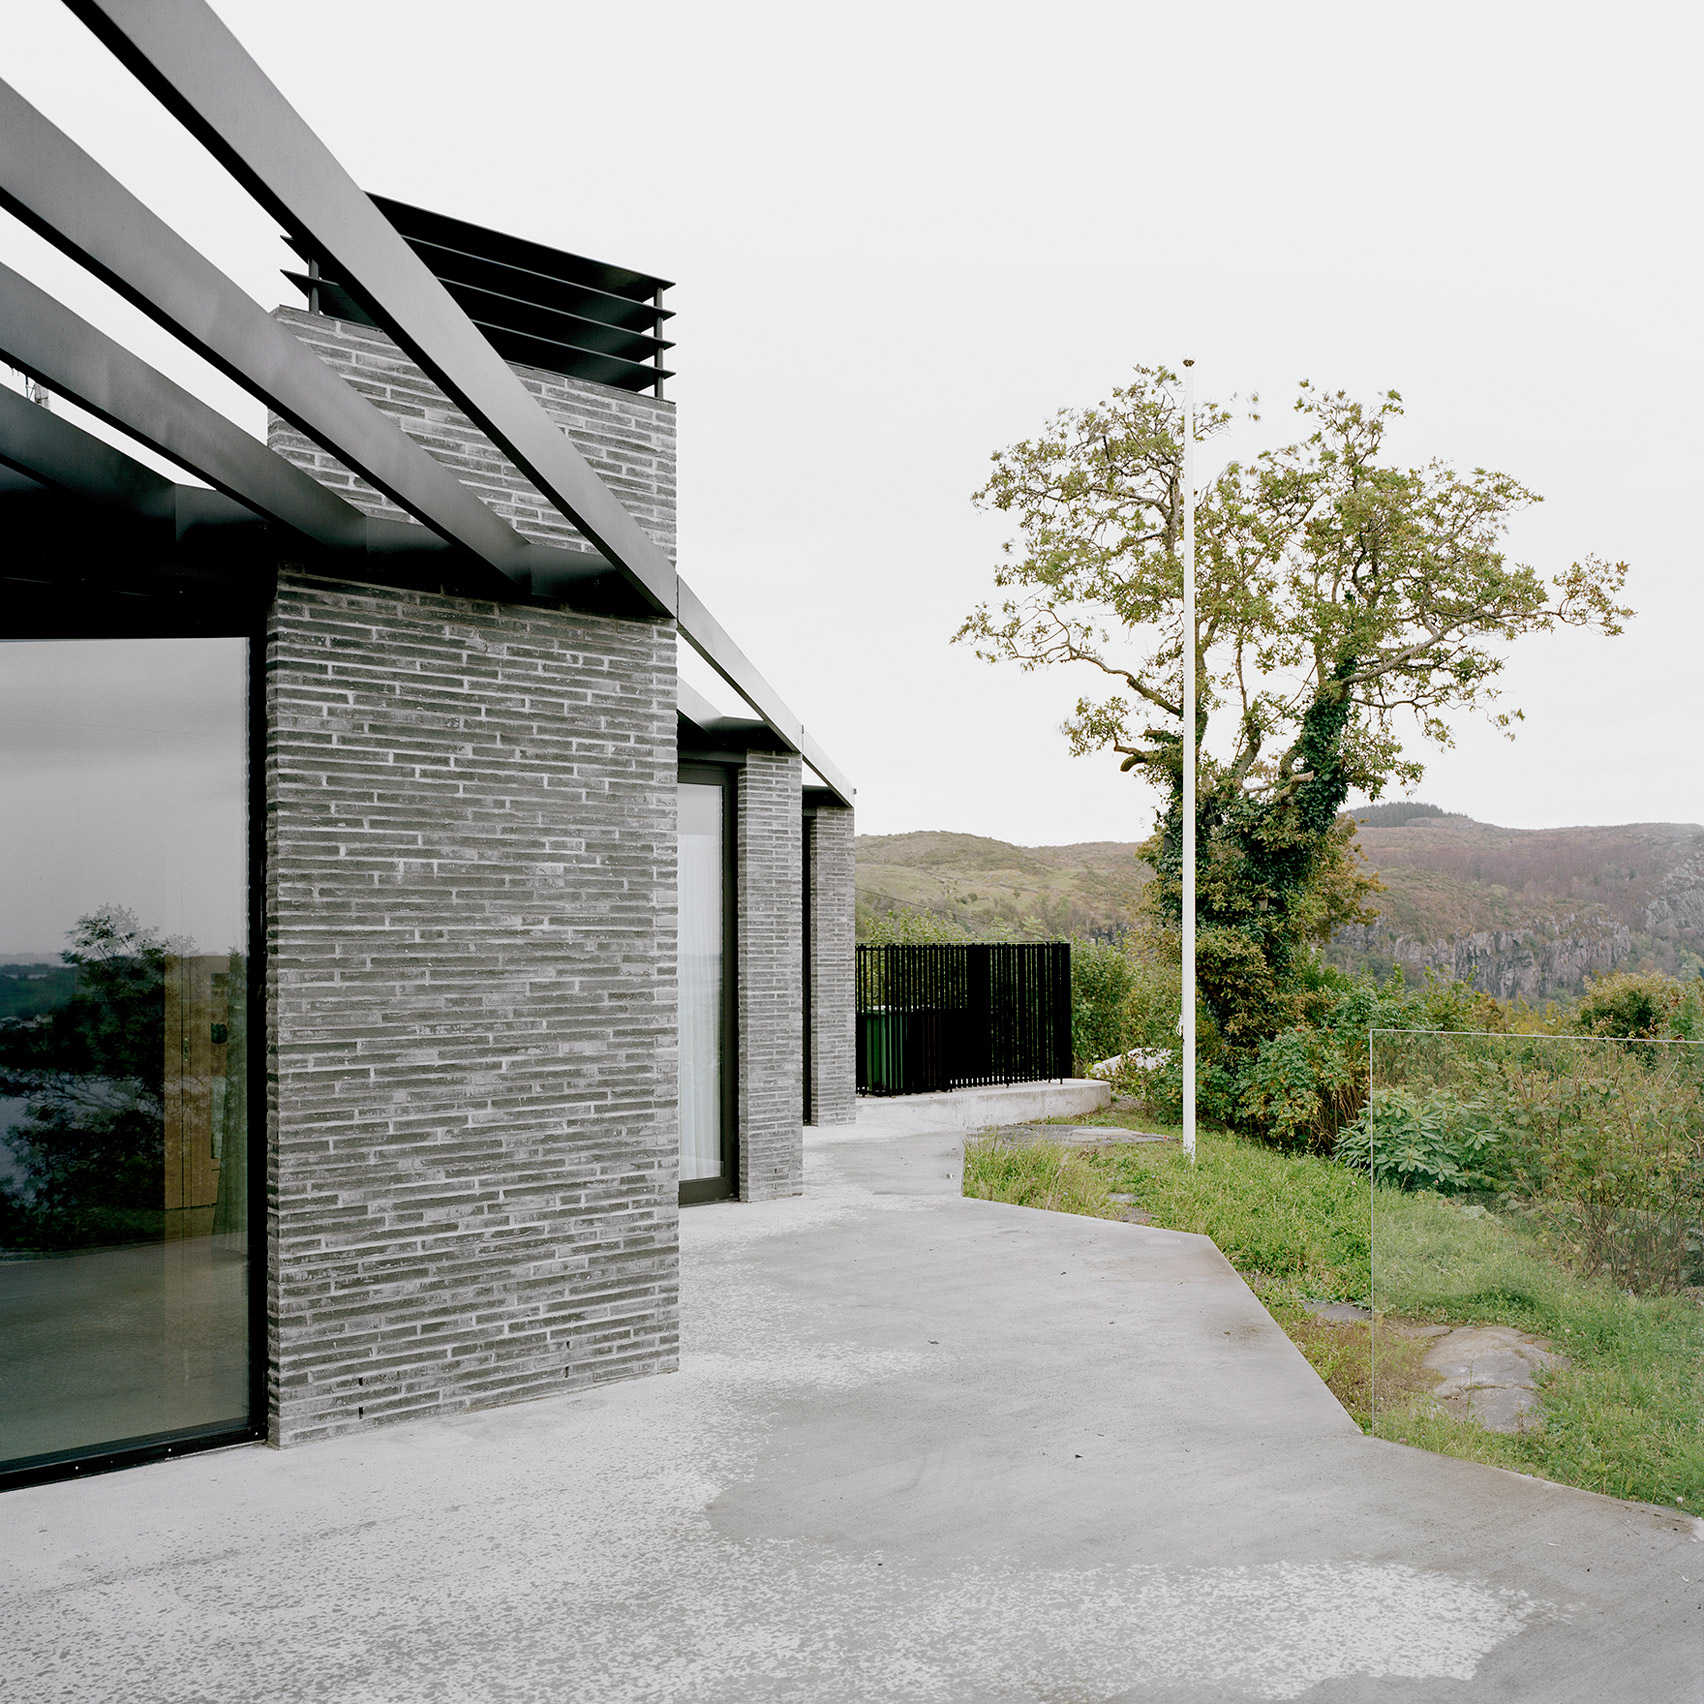 Vacation House on the Mastrafjord by Espen Surnevik